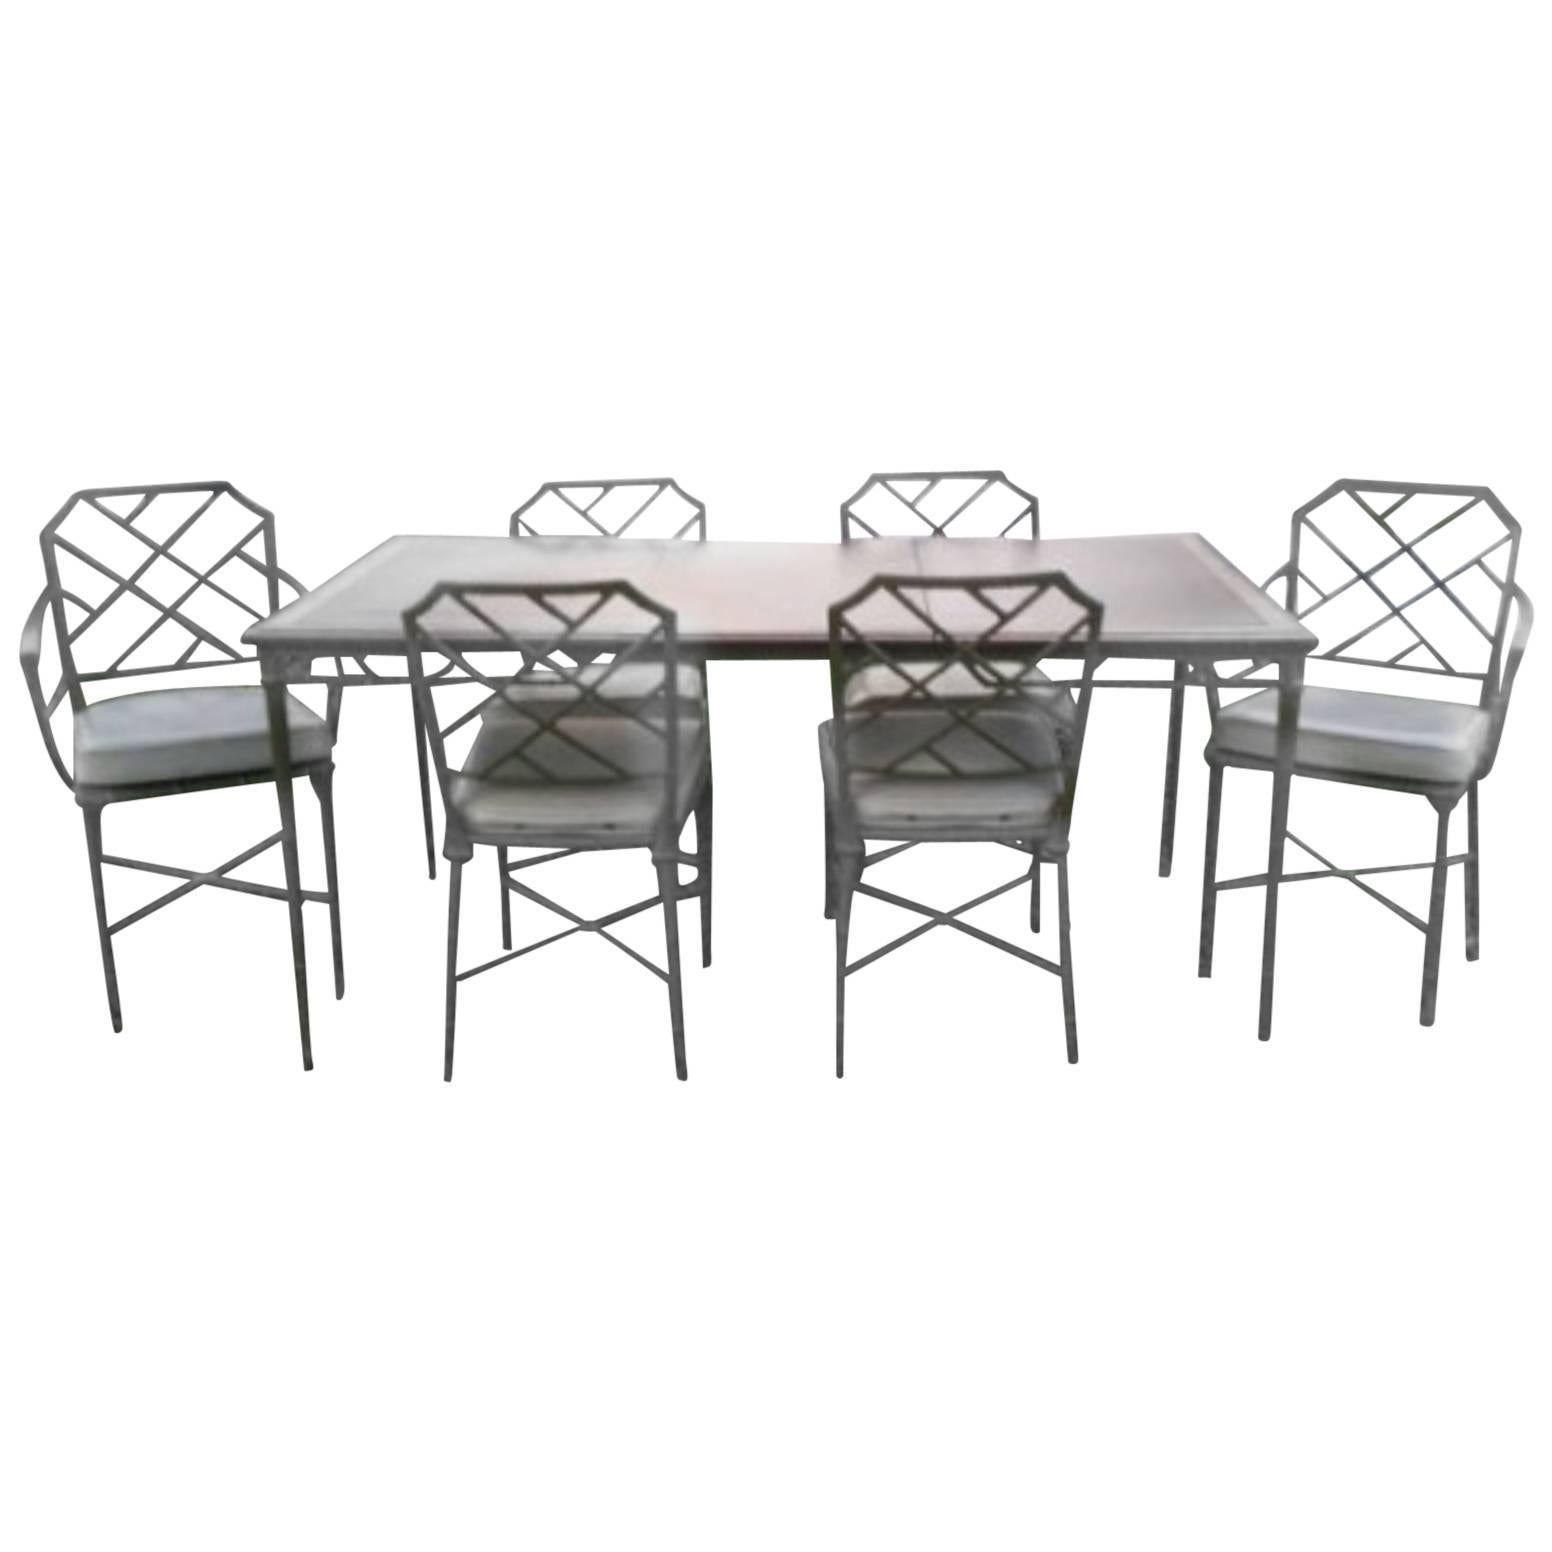 Brown Jordan Seven-Piece Calcutta Faux Bamboo Patio Set of Dining Table Chairs